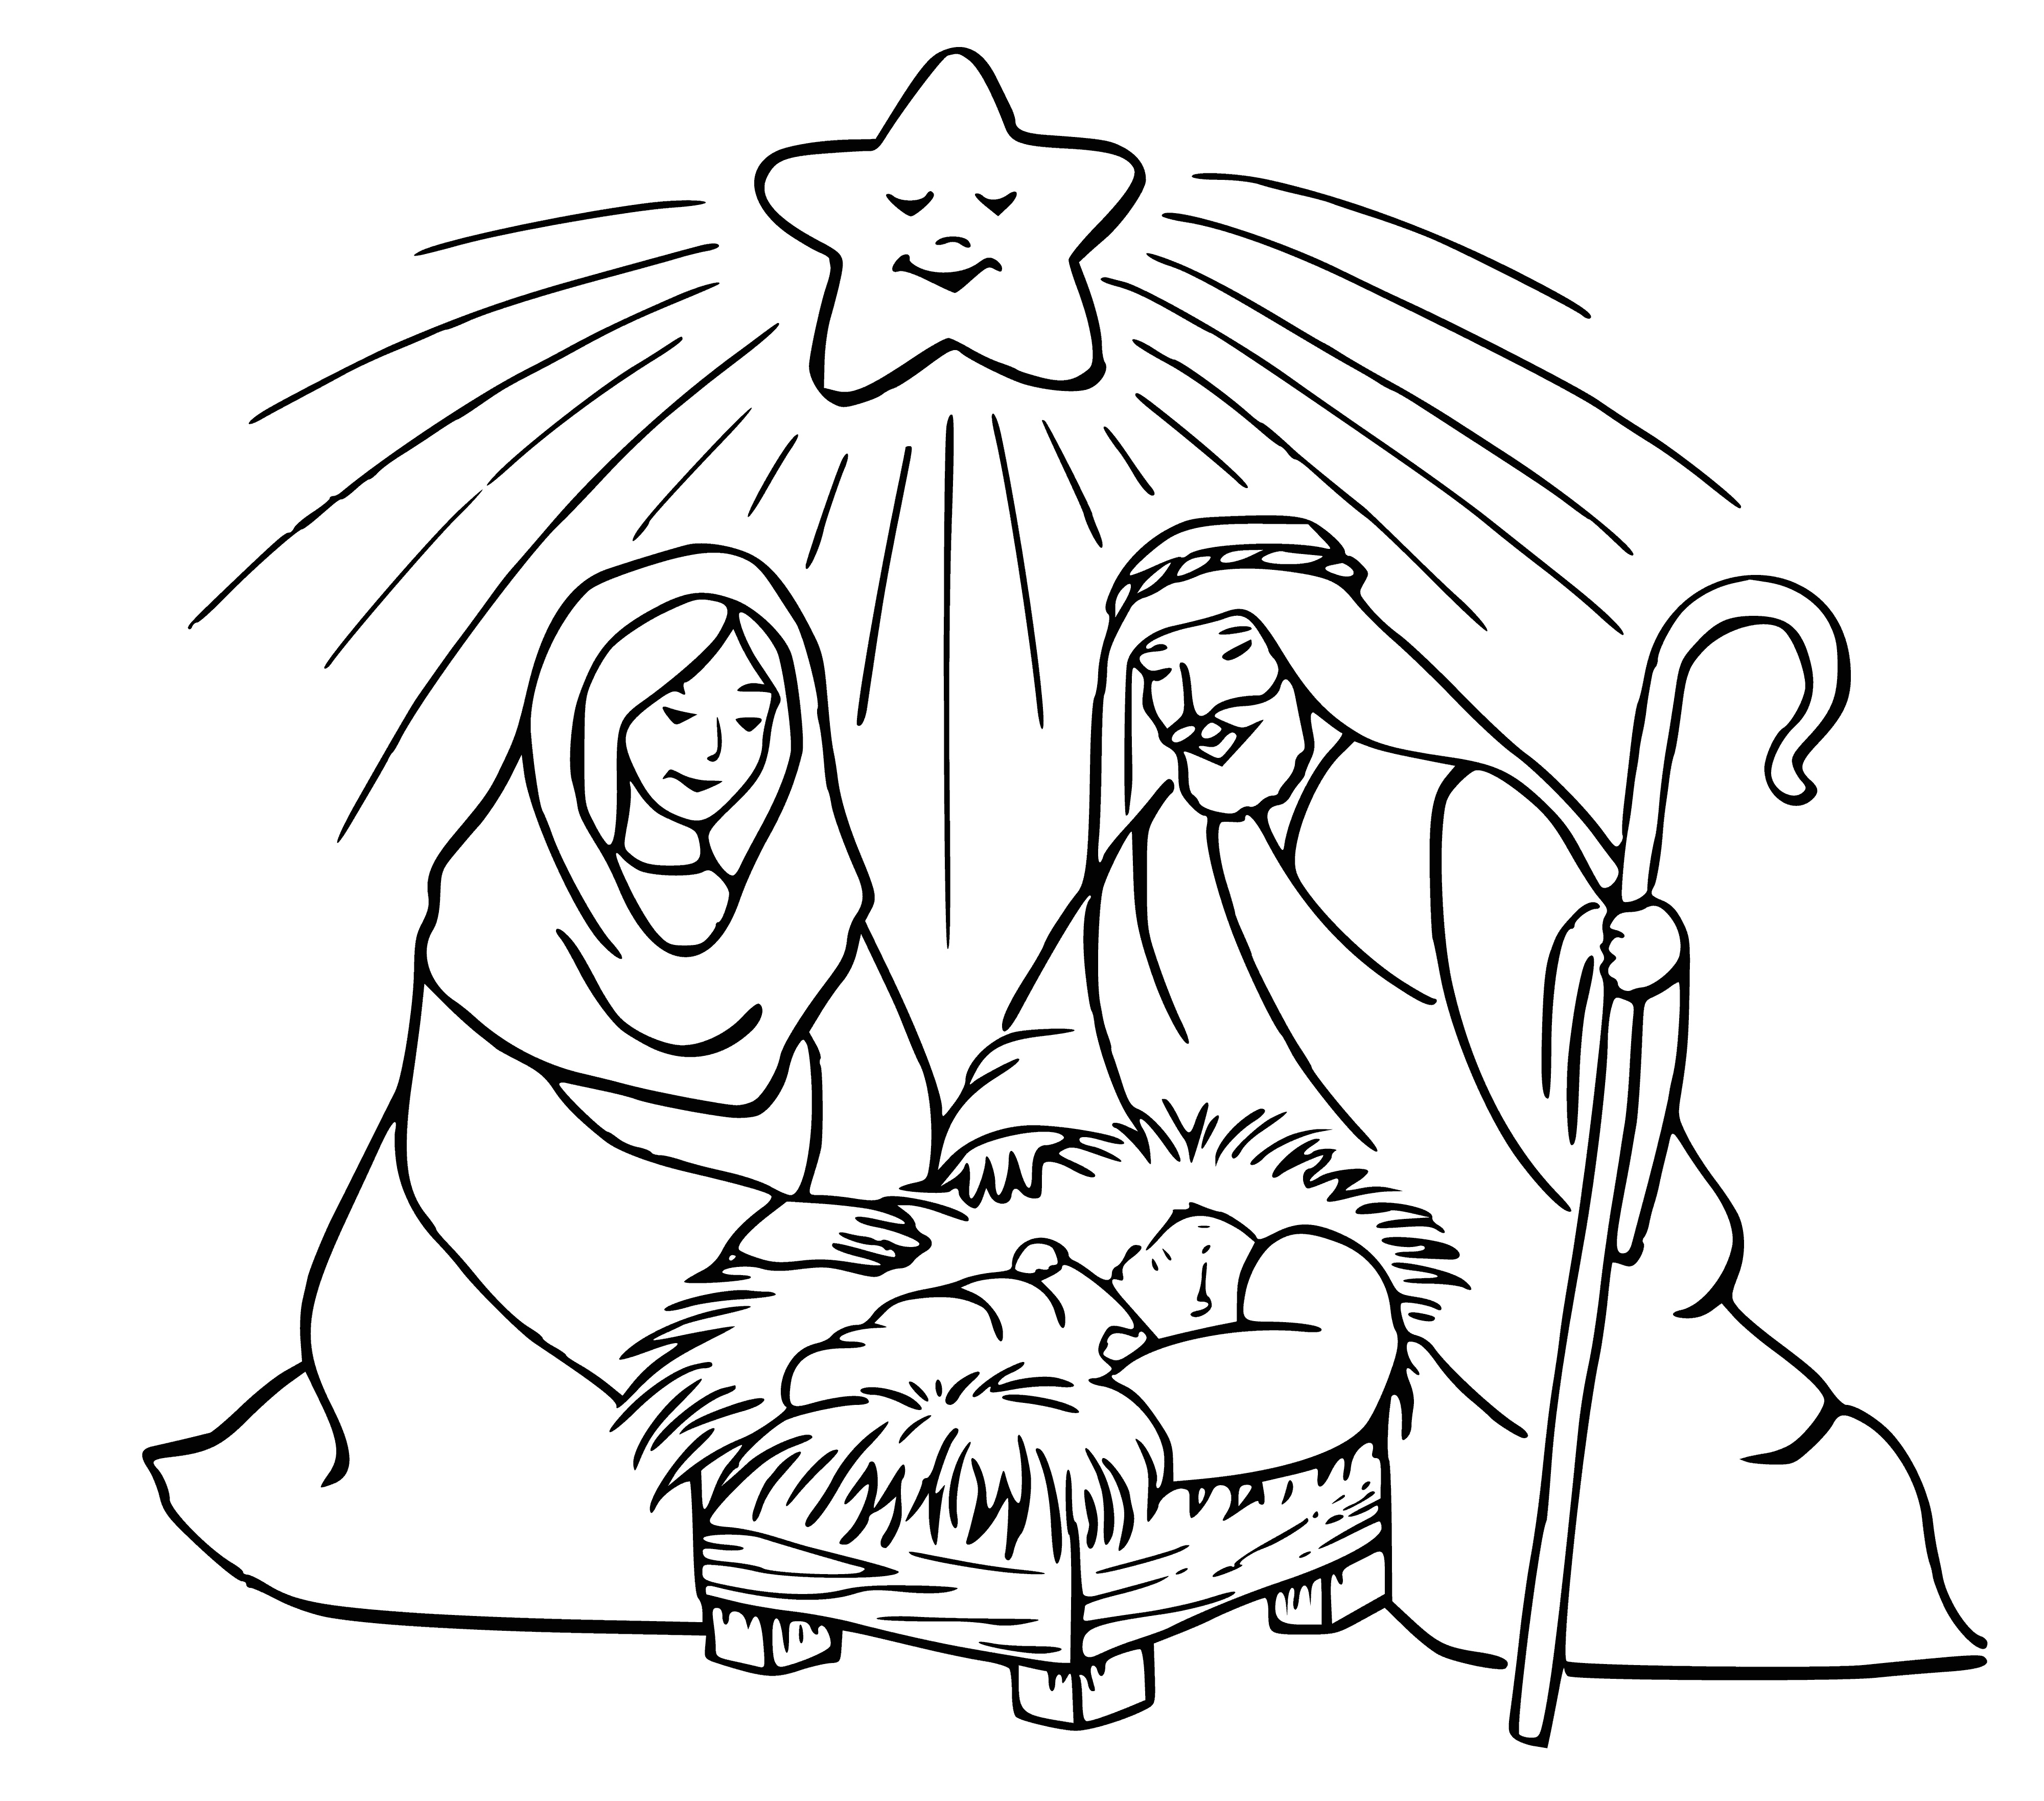 coloring page: Jesus born in a stable, wrapped in swaddling clothes, & laid in a manger with an angel & shepherds present.